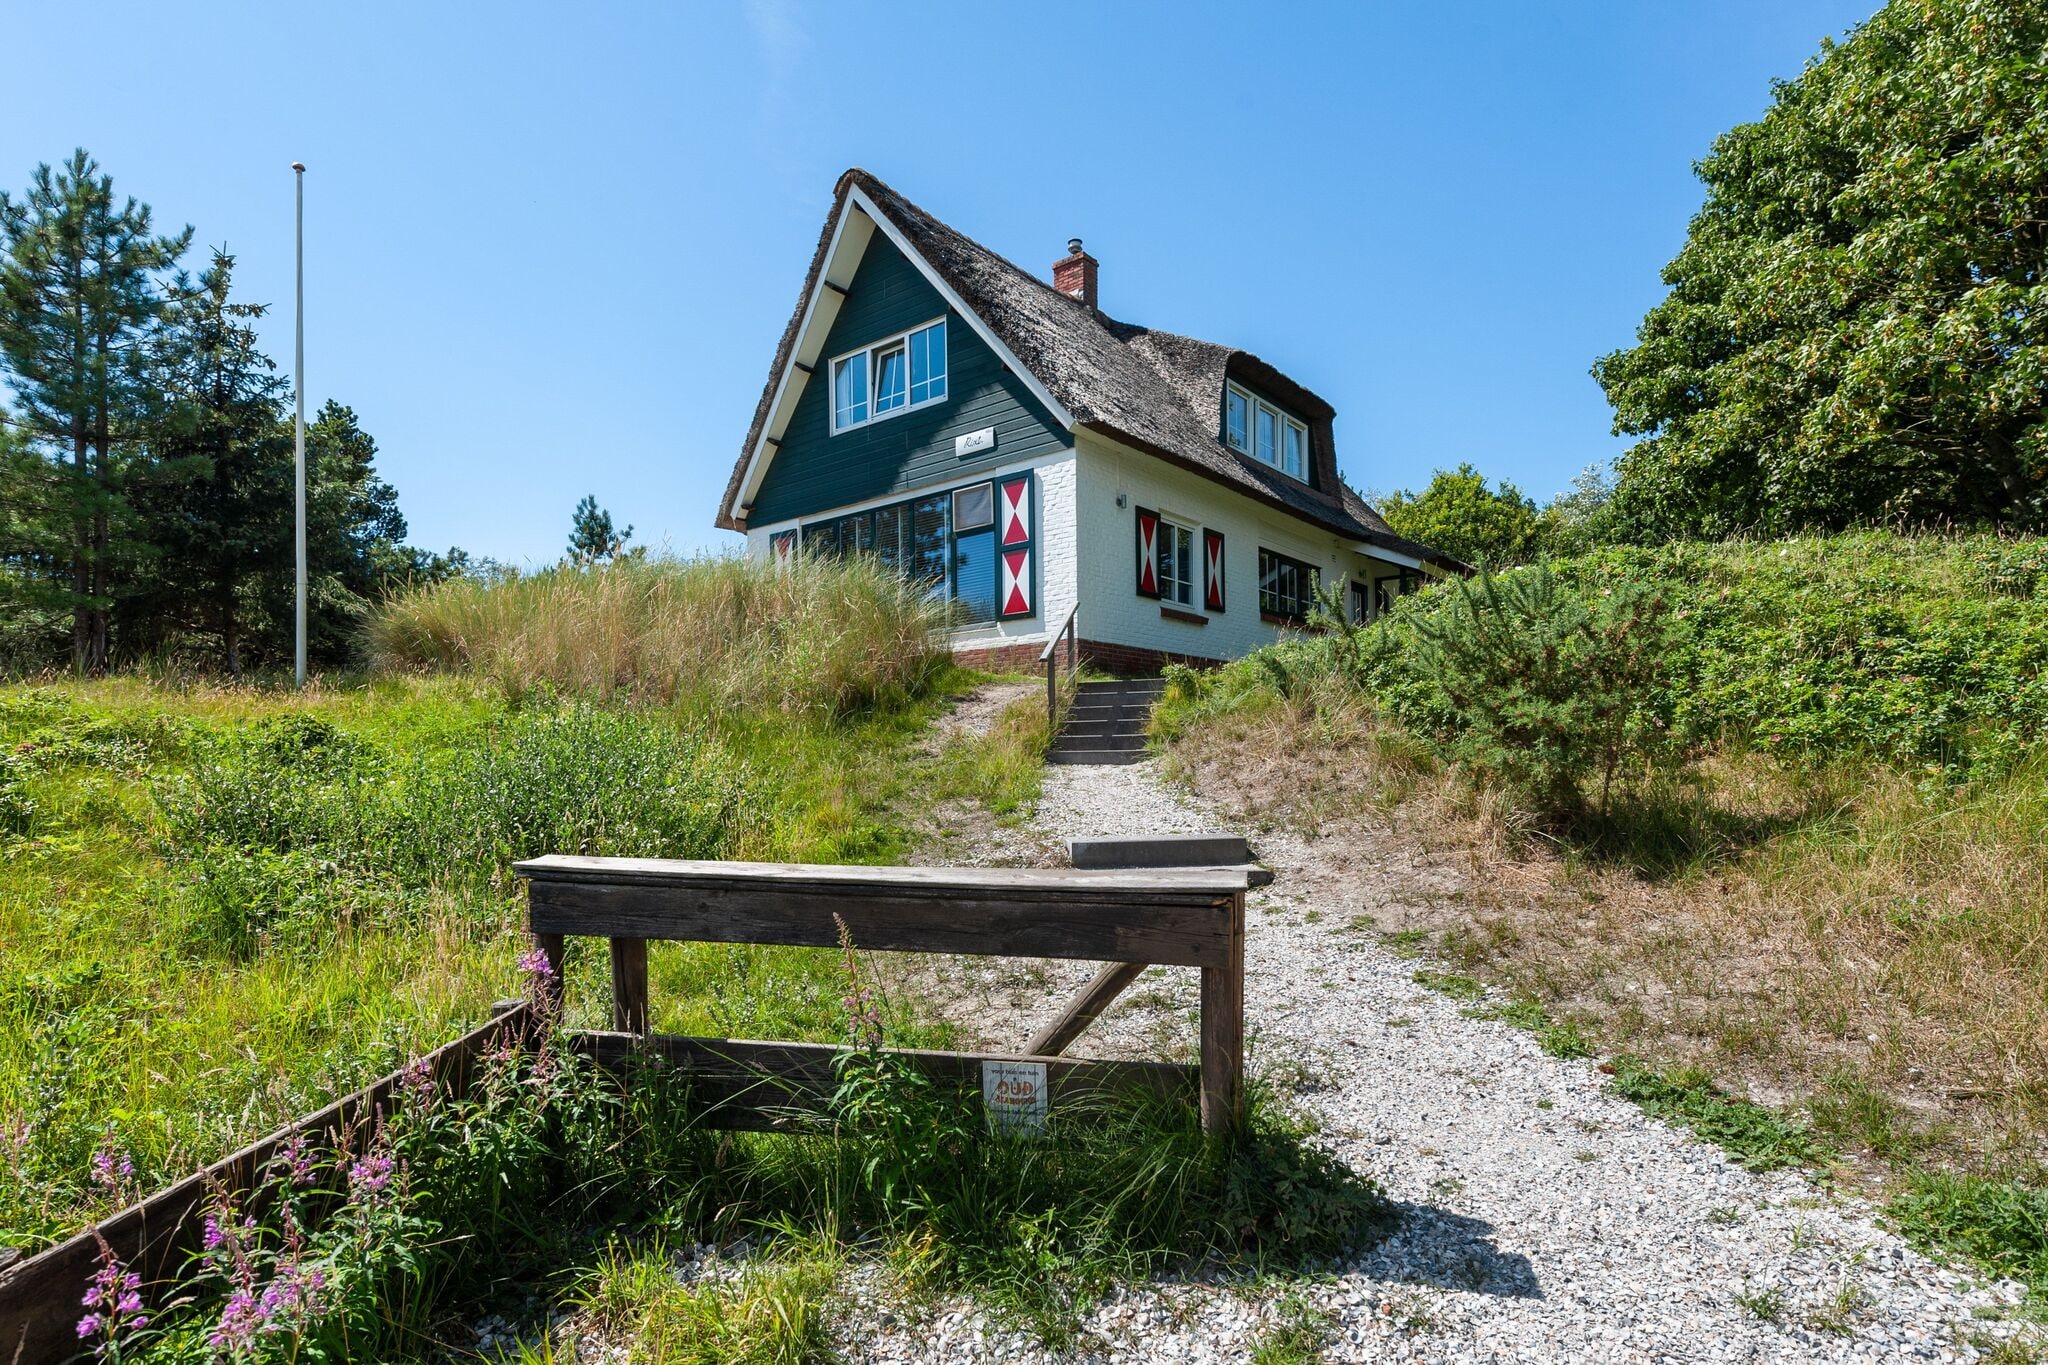 Beautiful dune villa with thatched roof on Ameland. 800 meters from the beach